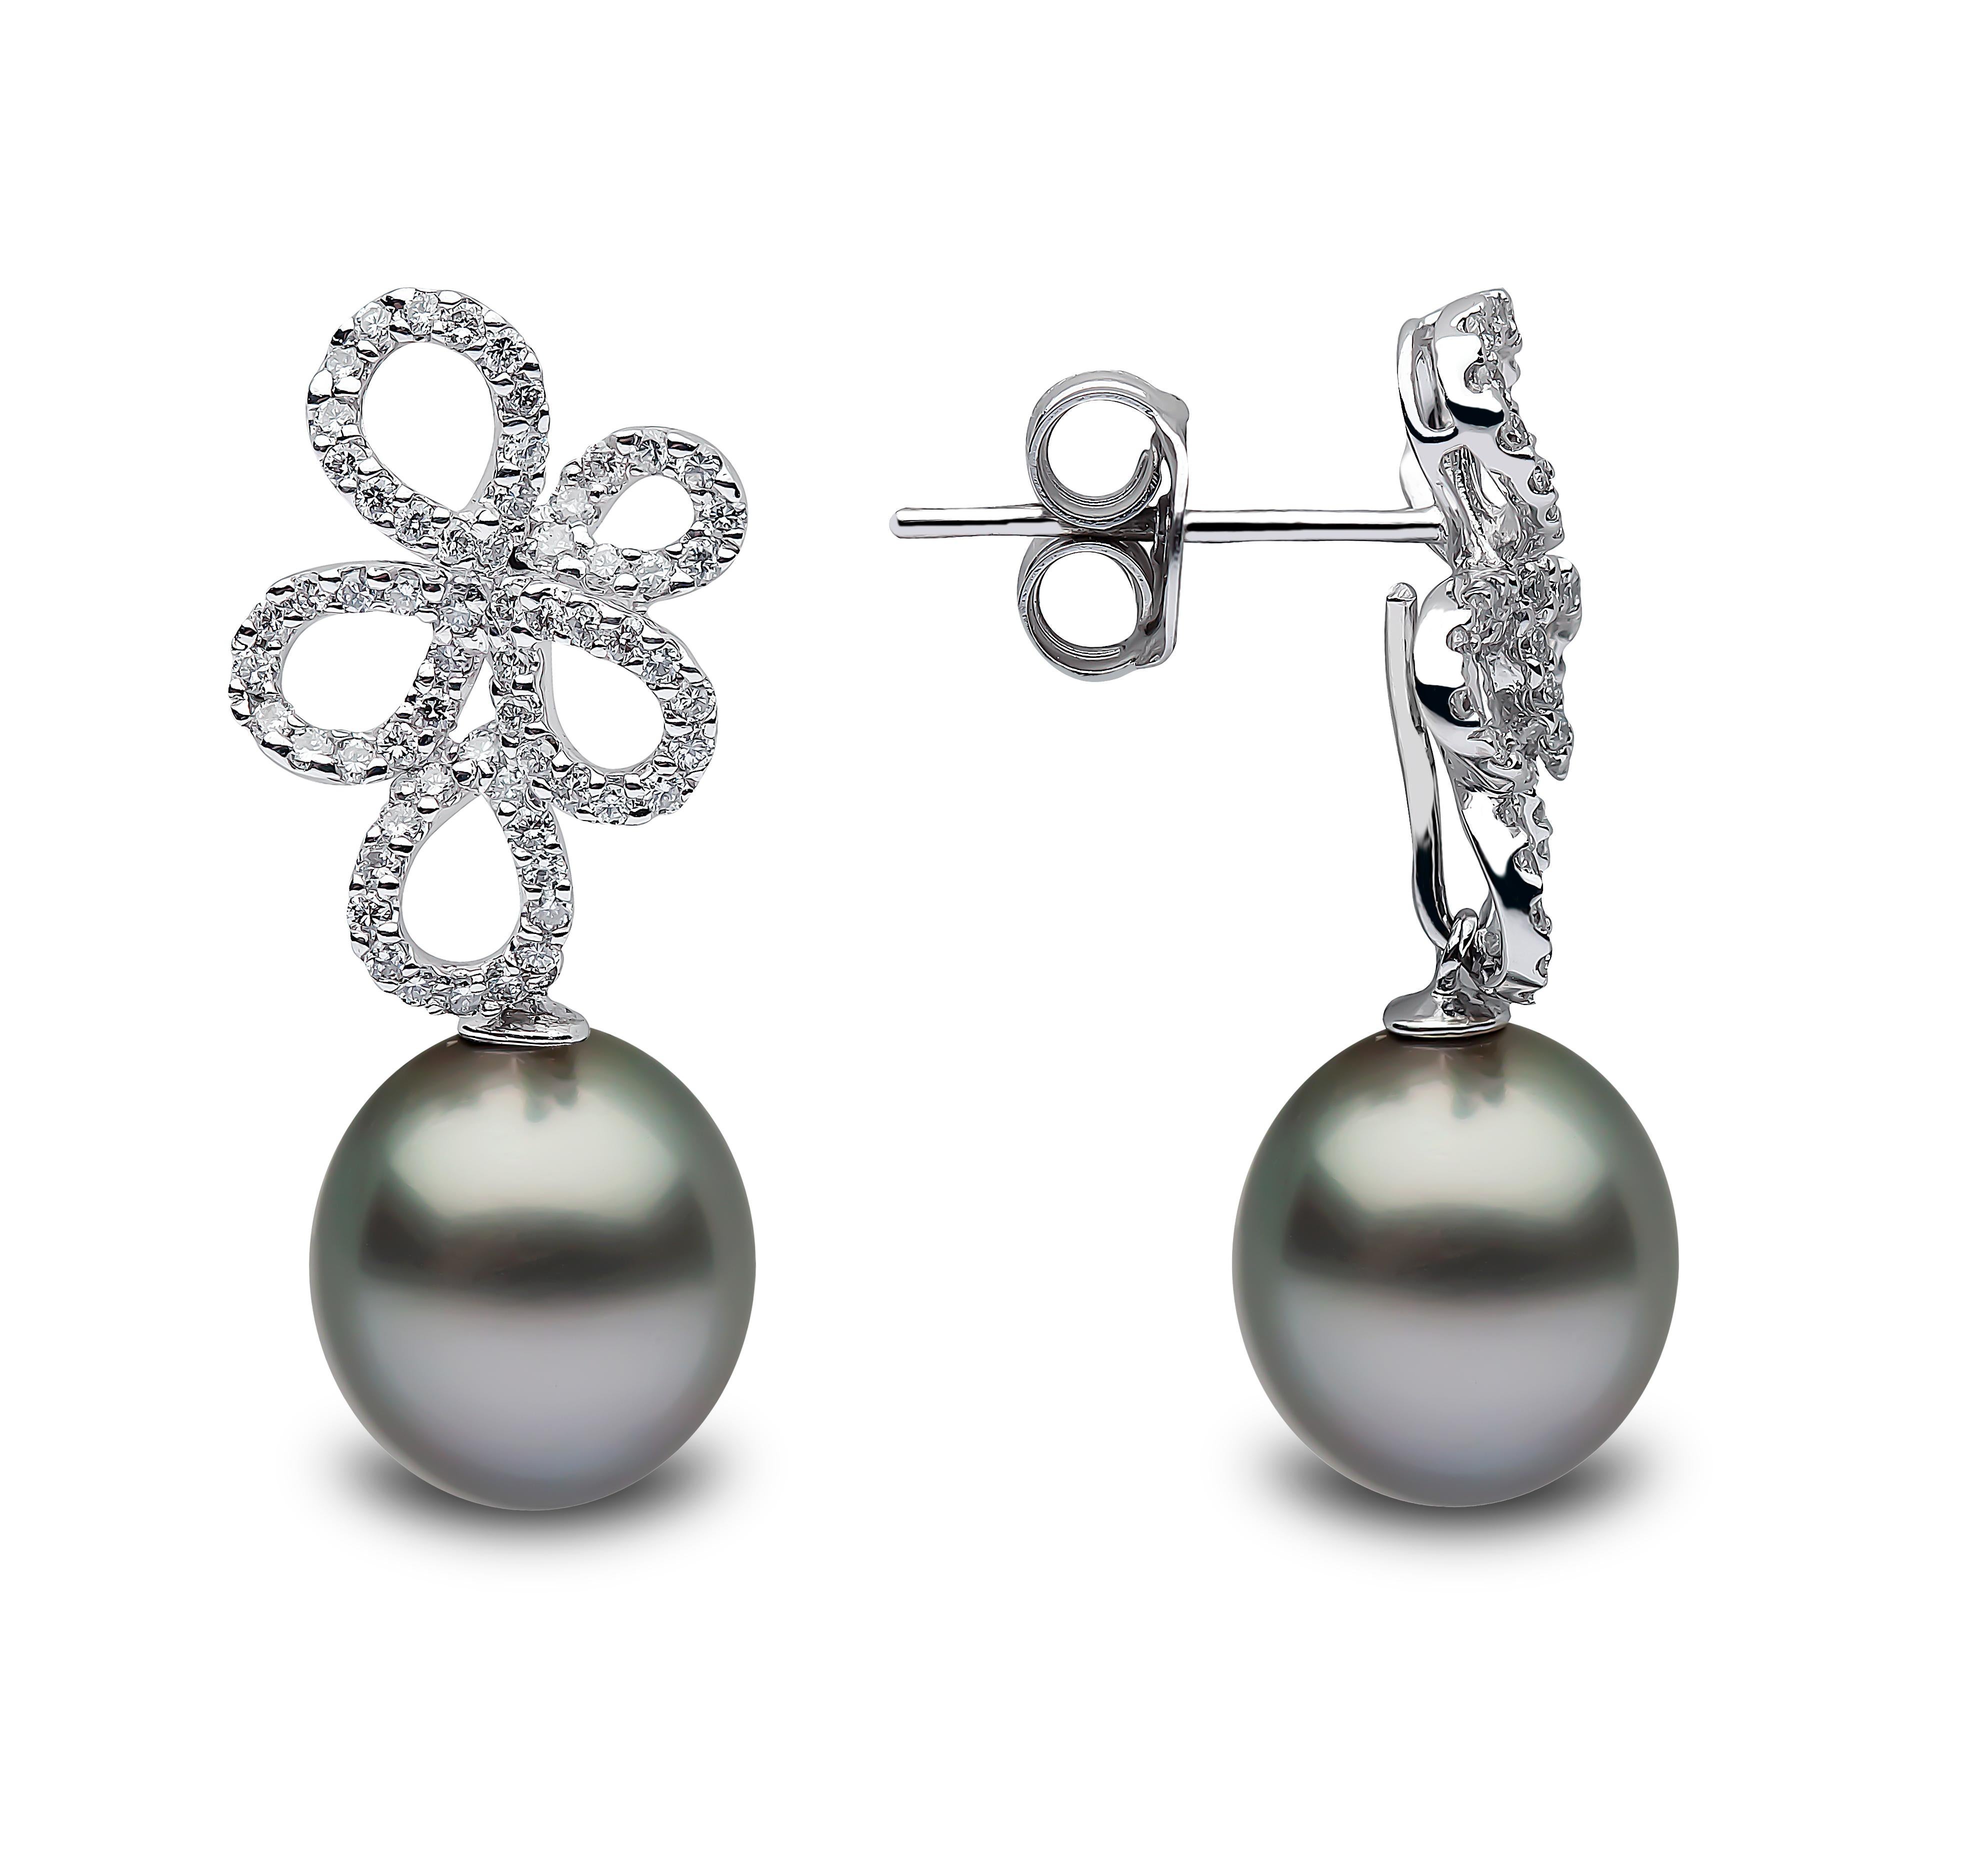 These striking earrings by Yoko London combine dark Tahitian pearls with a mesmeric arrangement of diamonds. This alluring combination will add a touch of unique elegance to any outfit. 
-	10-10.5mm Tahitian Pearls
-	124 Diamonds (Total Carat